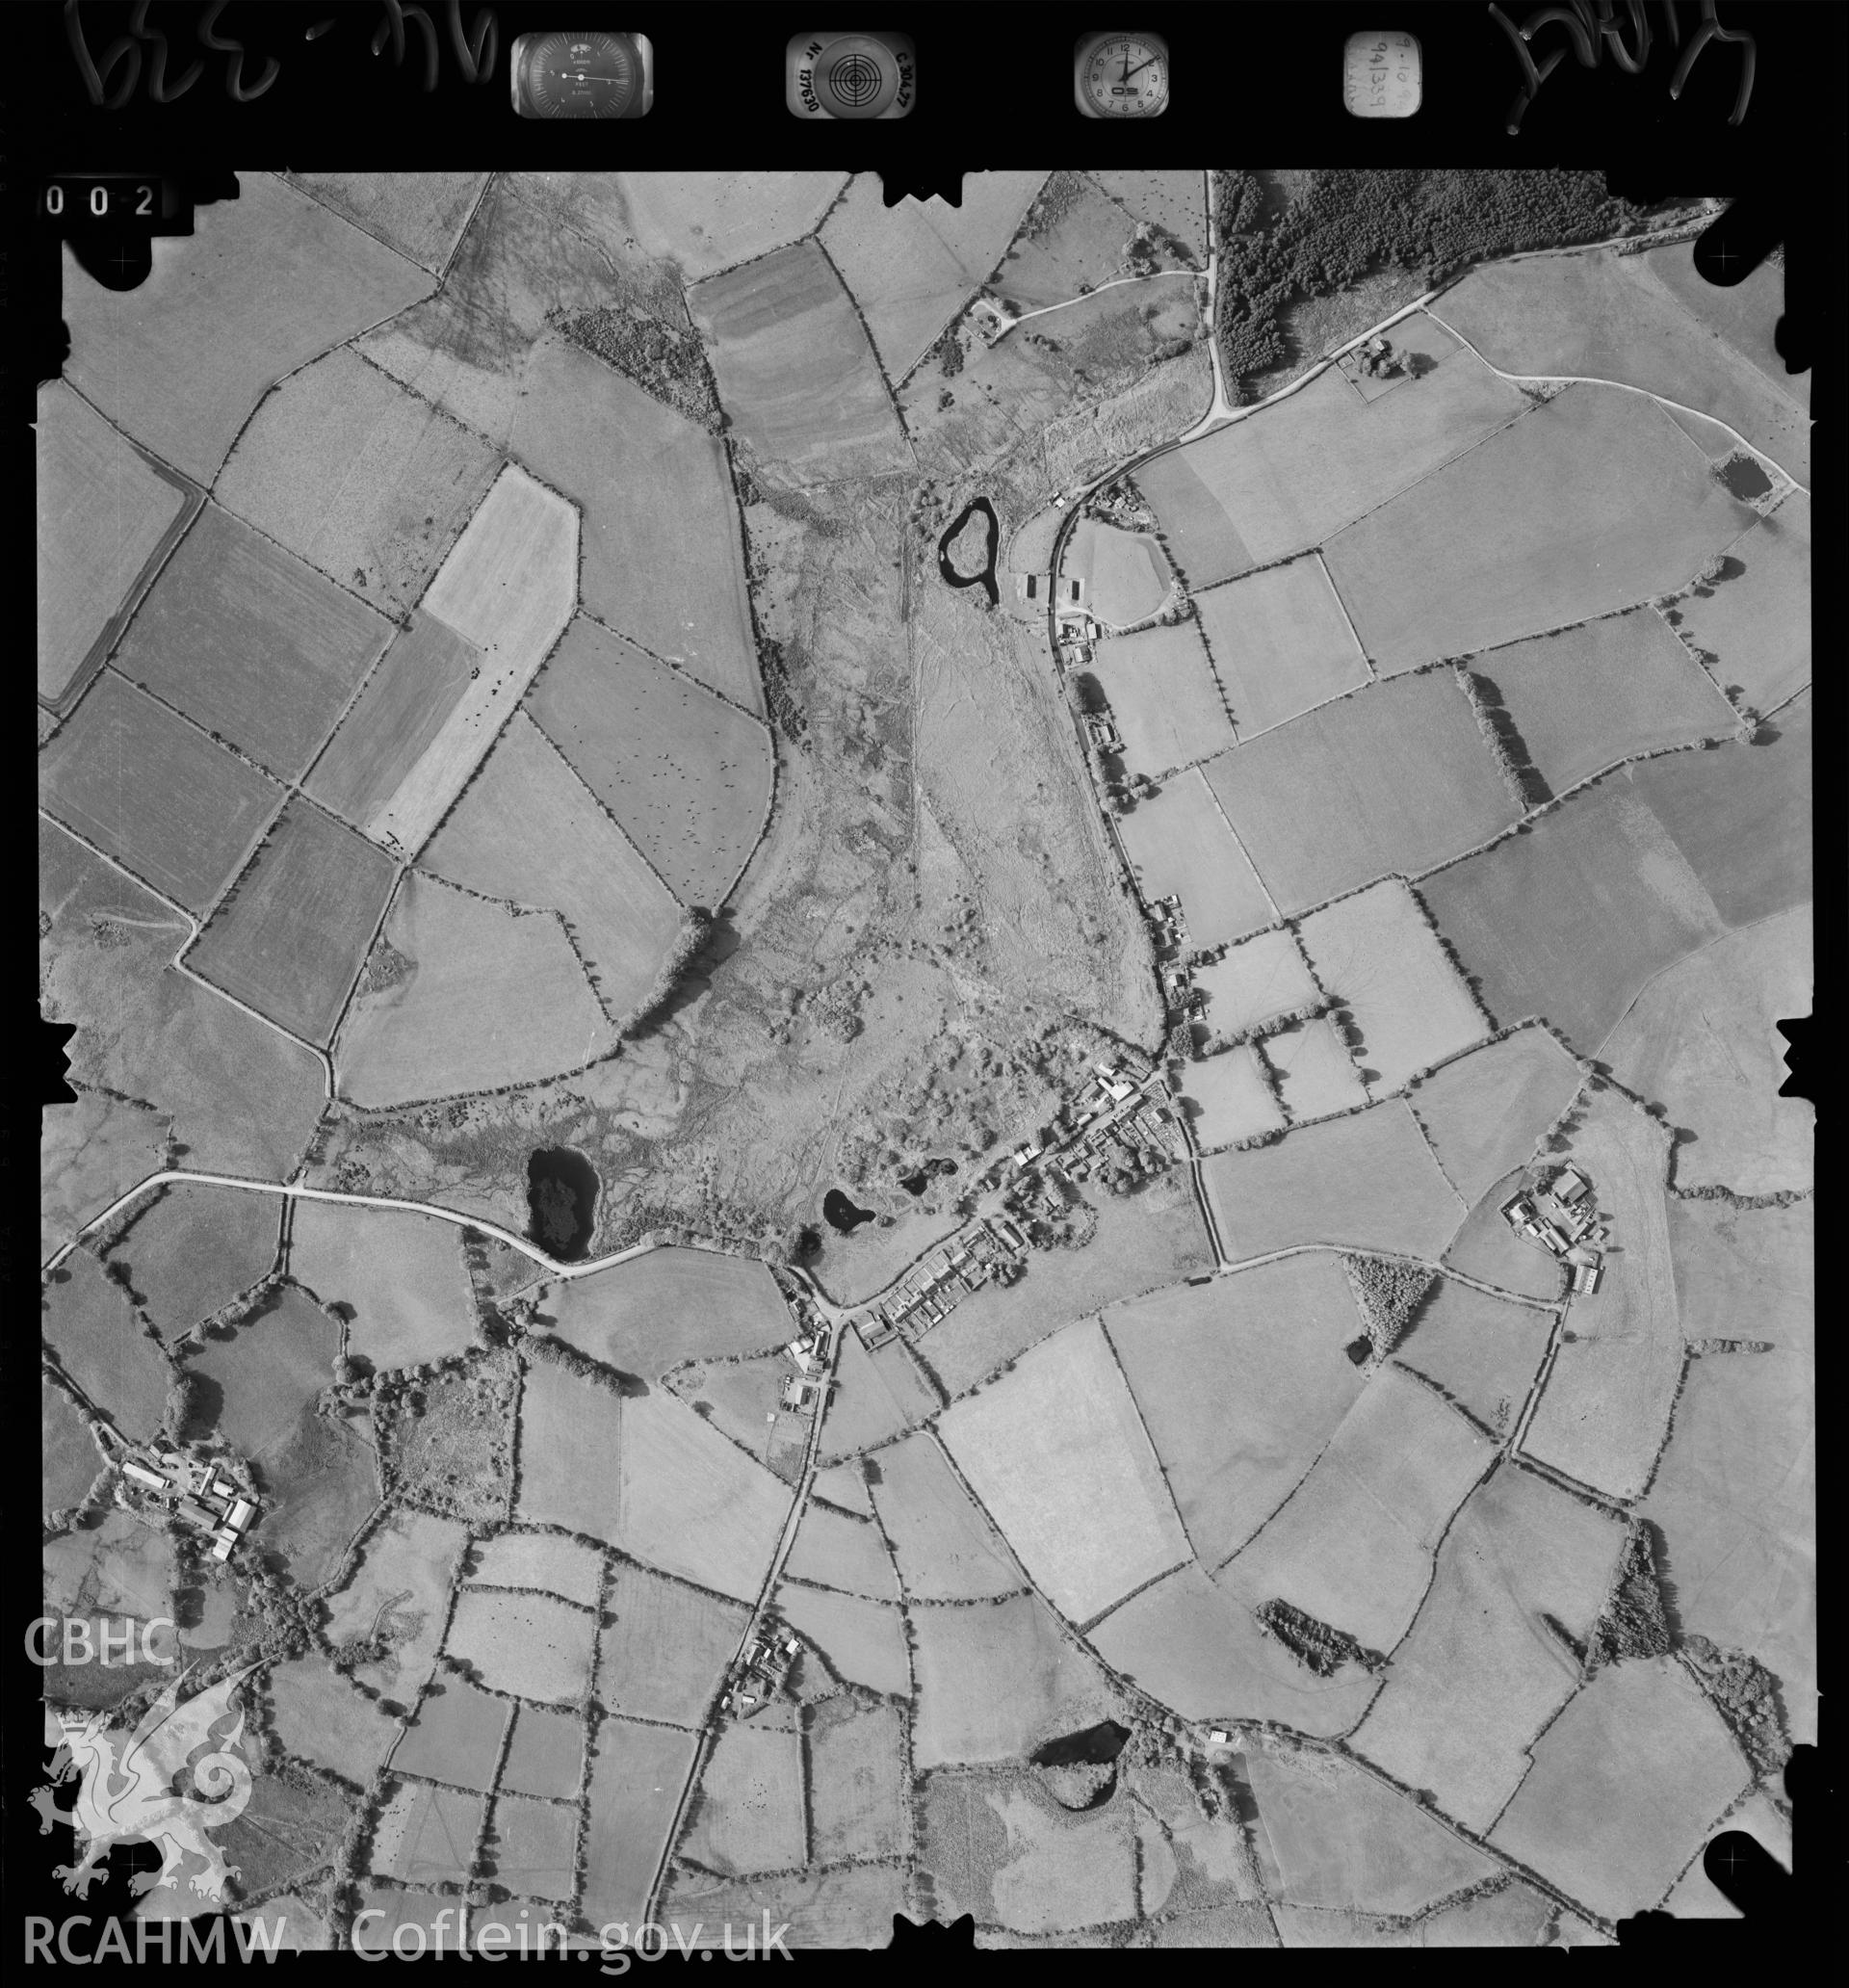 Digitized copy of an aerial photograph showing Gorsgoch area, taken by Ordnance Survey, 1994.